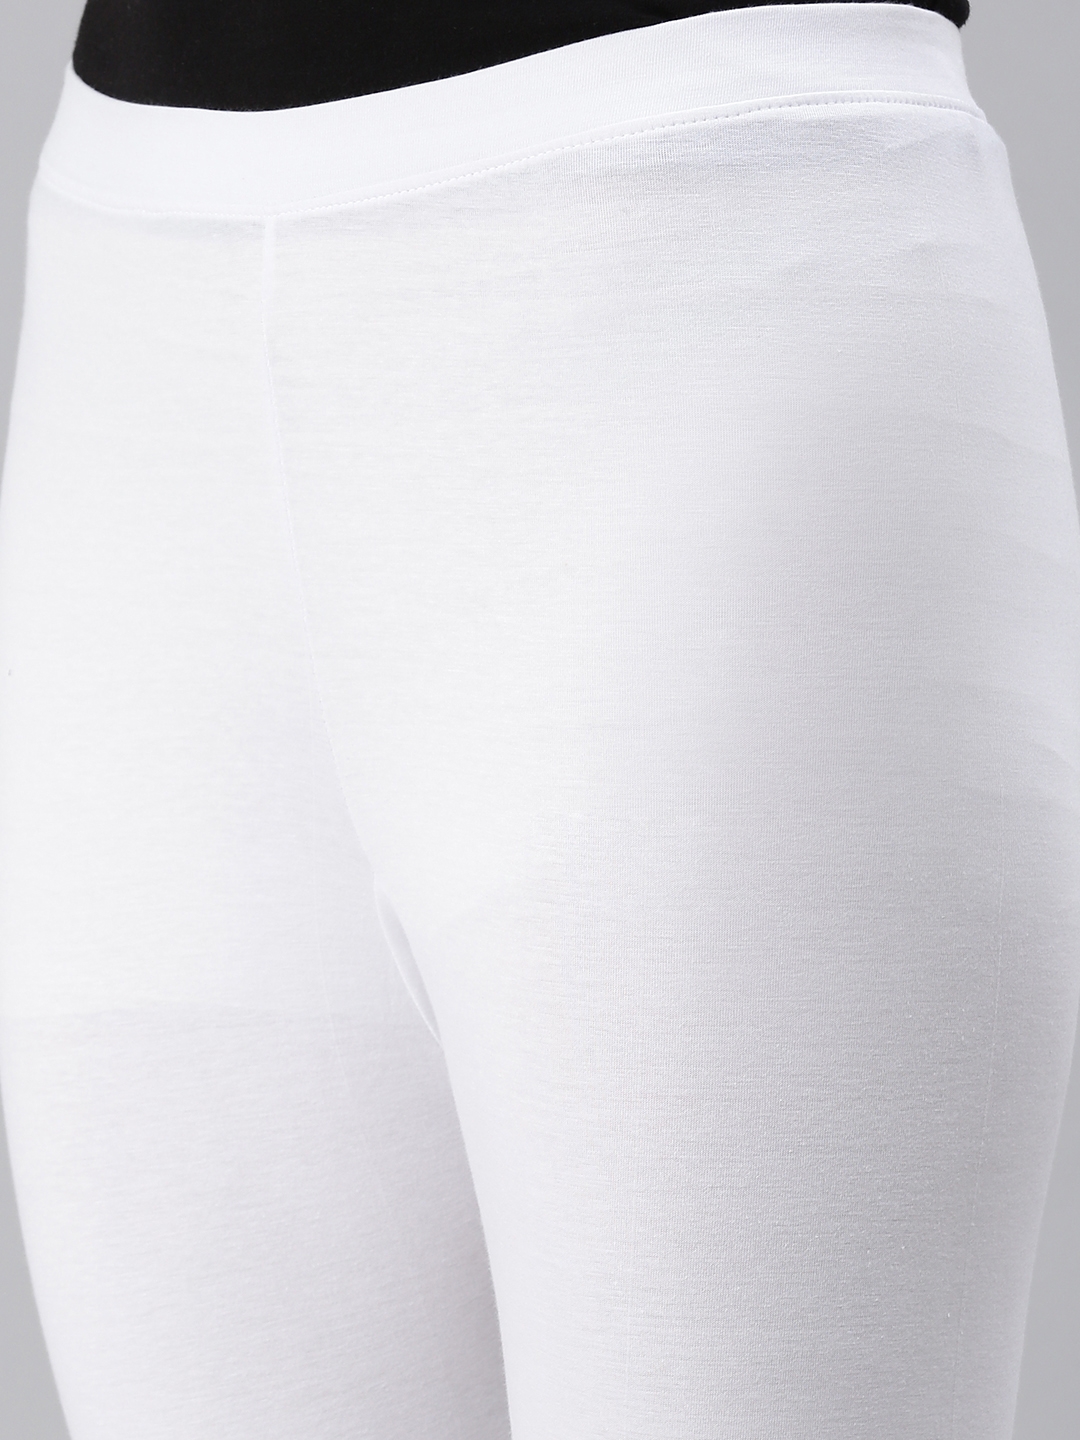 Kryptic | Kryptic Women Cotton Stretched Solid  White Mid-Ankle length Legging 4